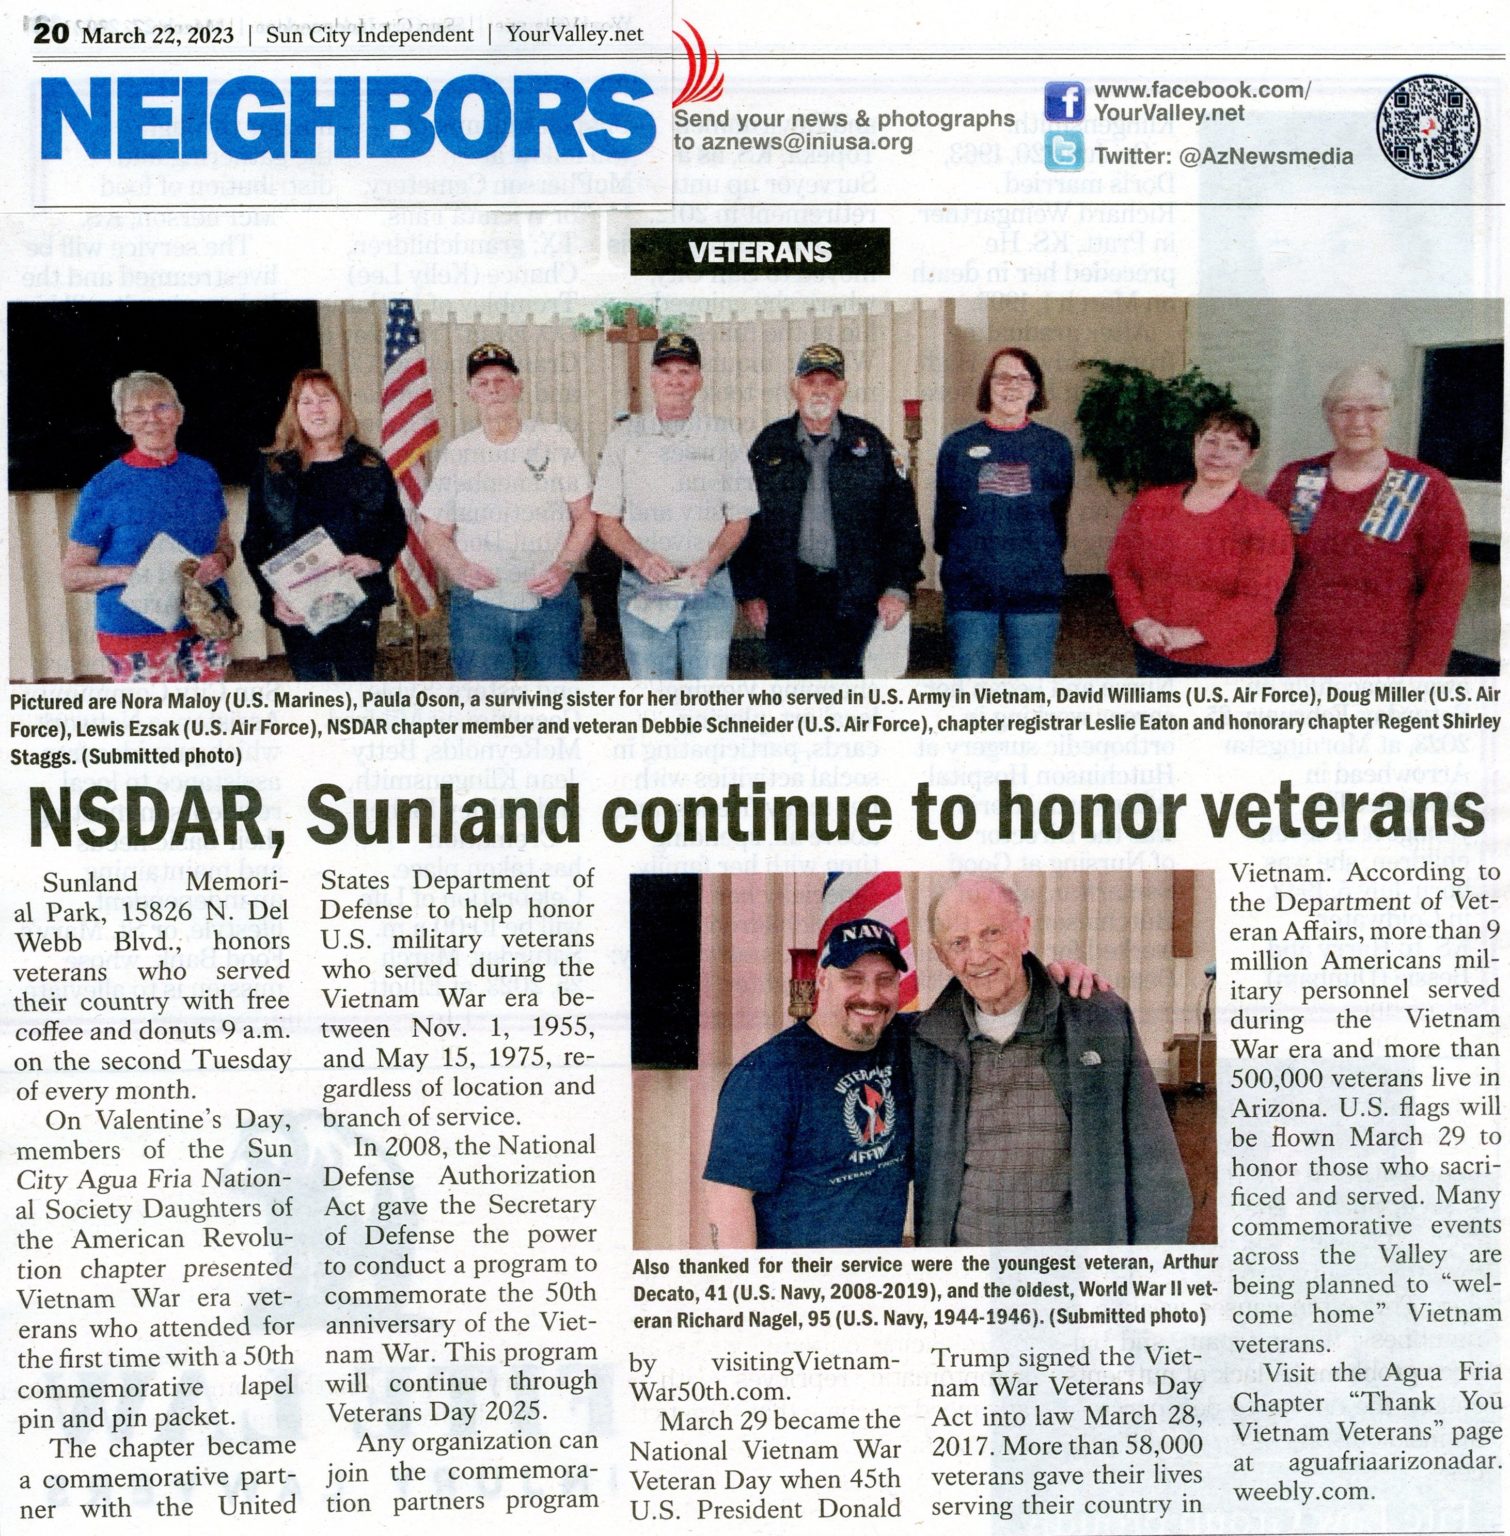 Newspaper Article. NSDAR, Sunland Continue to Honor Veterans